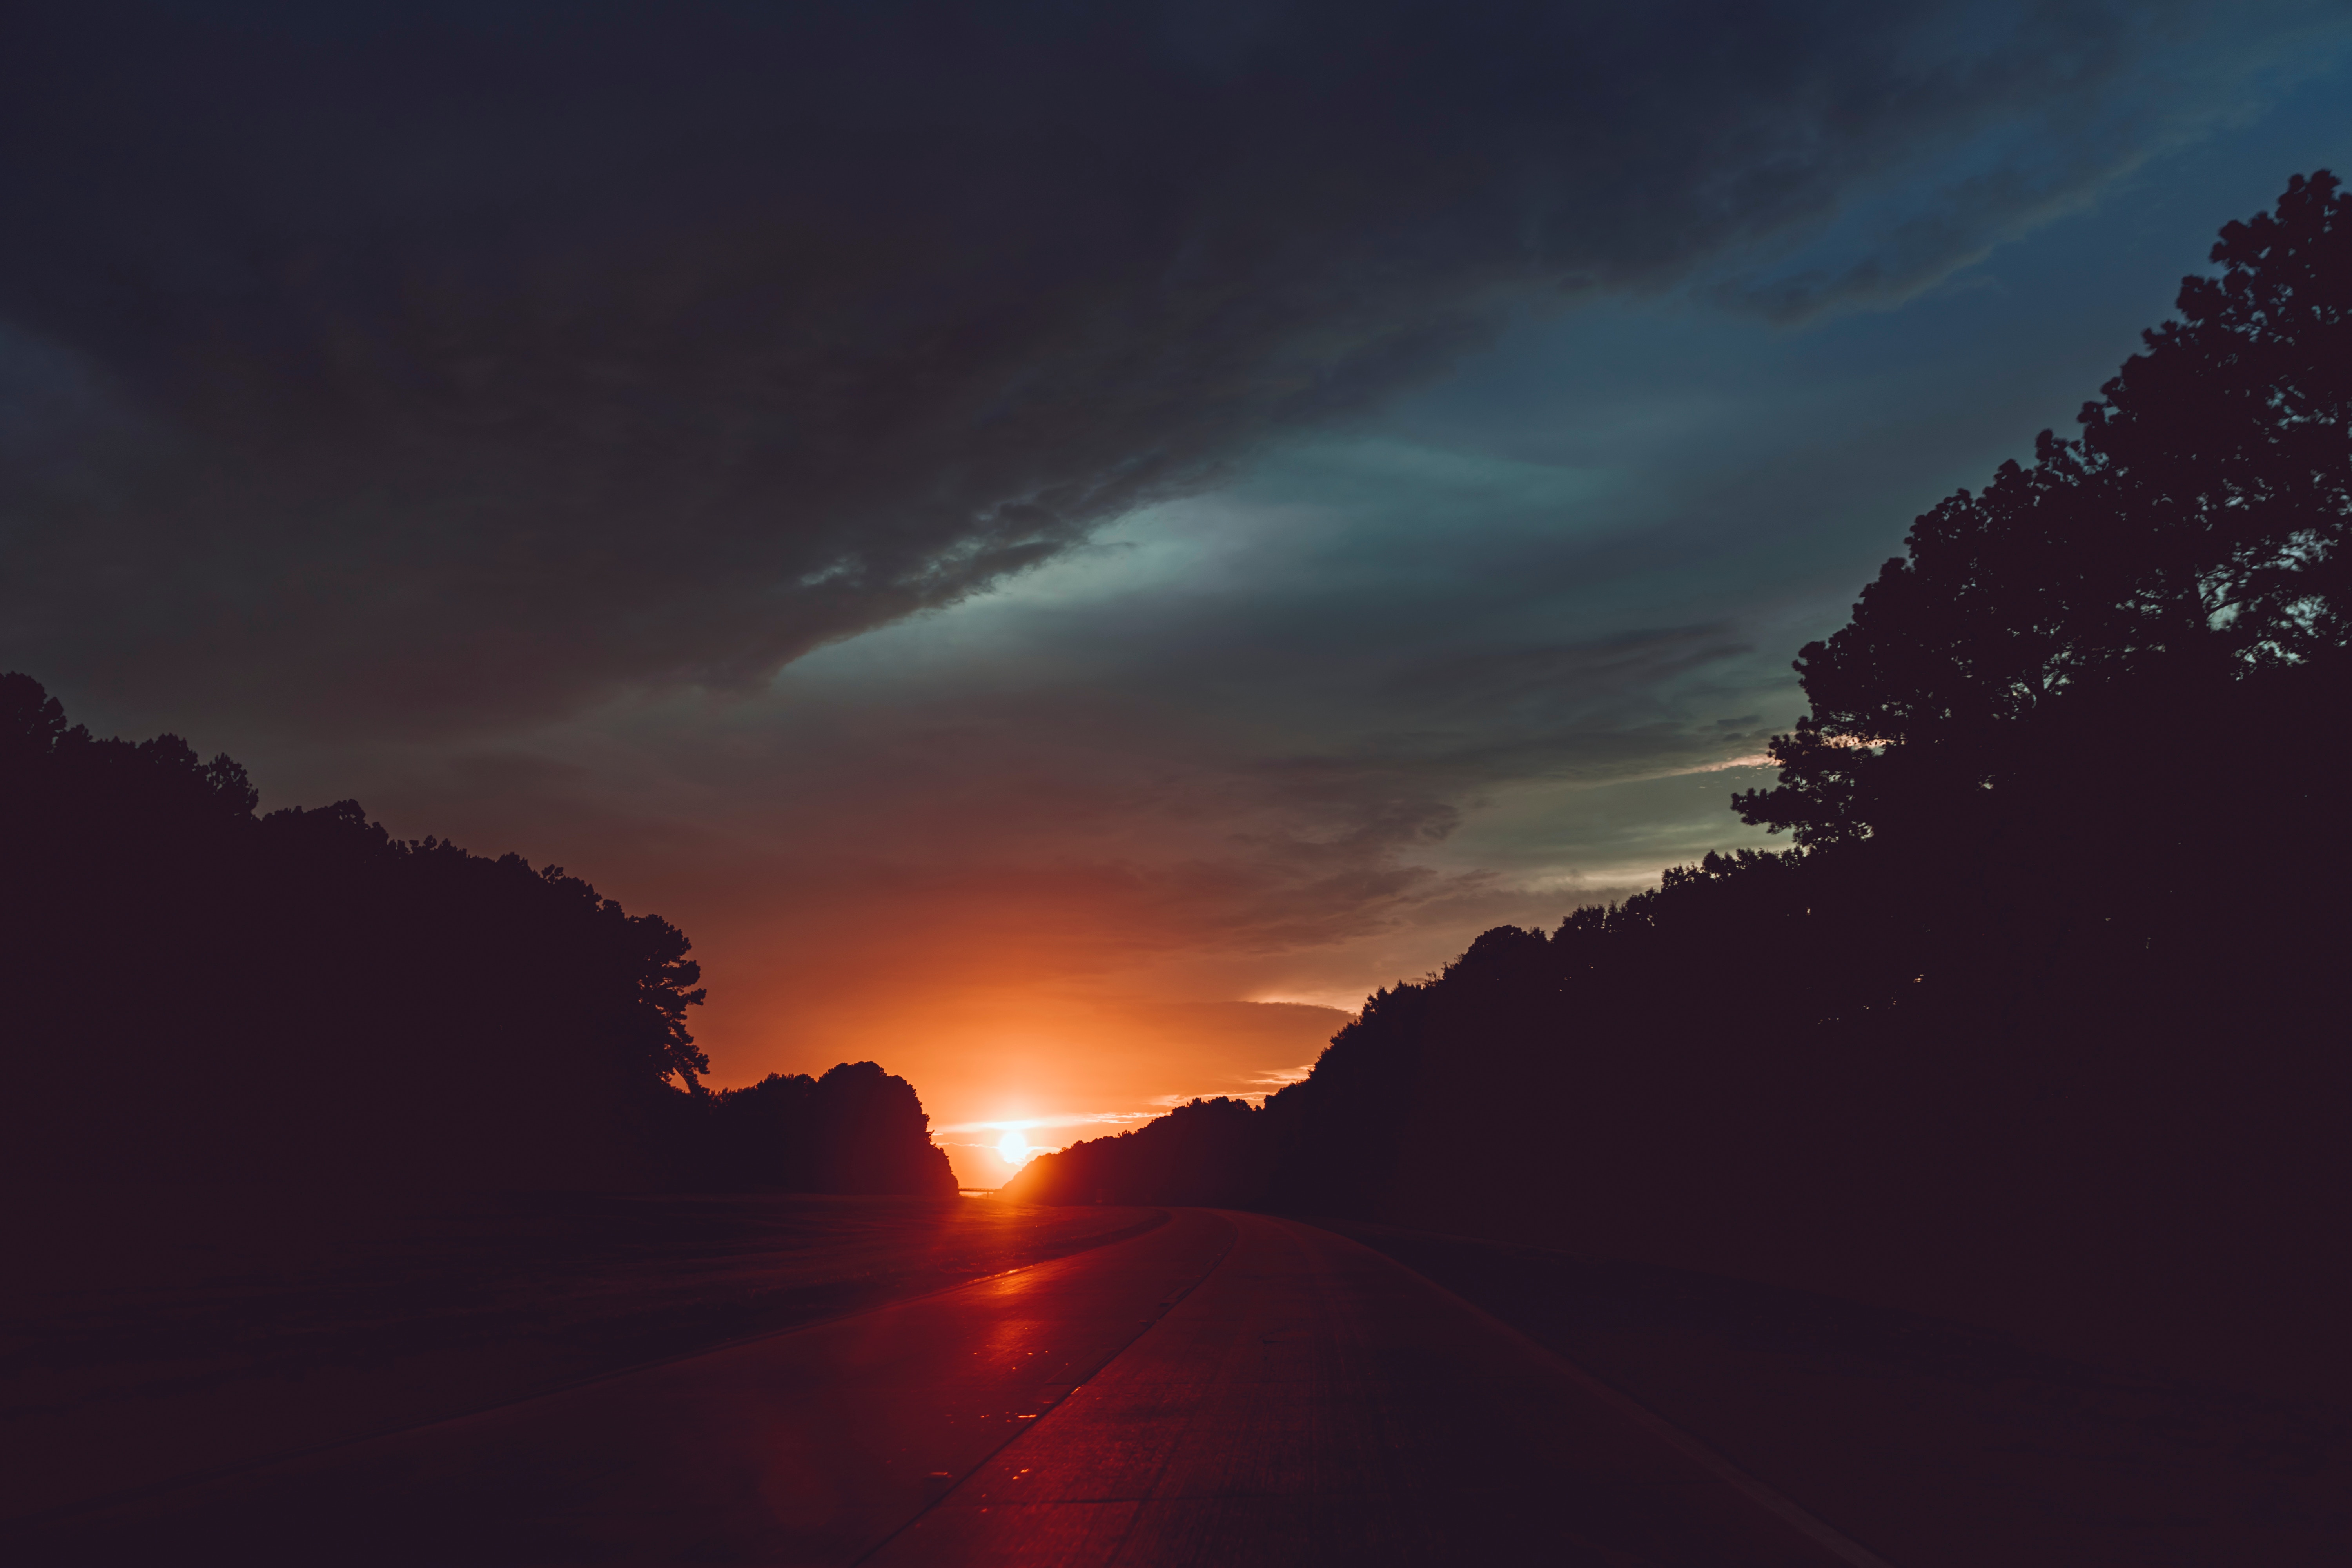 Hd Road View With Sunset Wallpapers